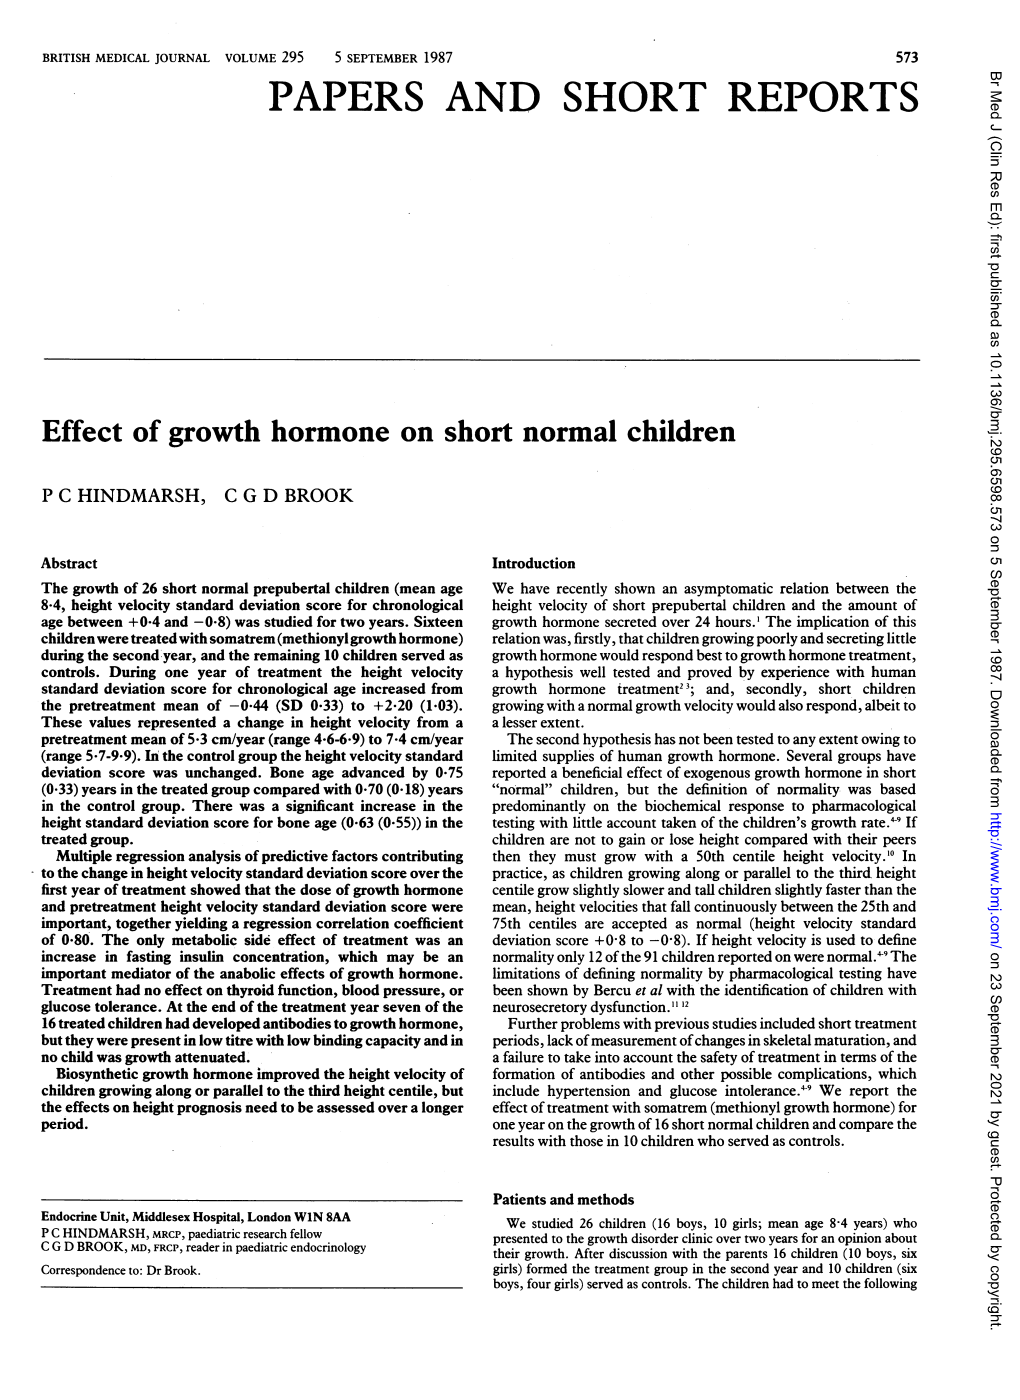 Effect of Growth Hormone on Short Normal Children